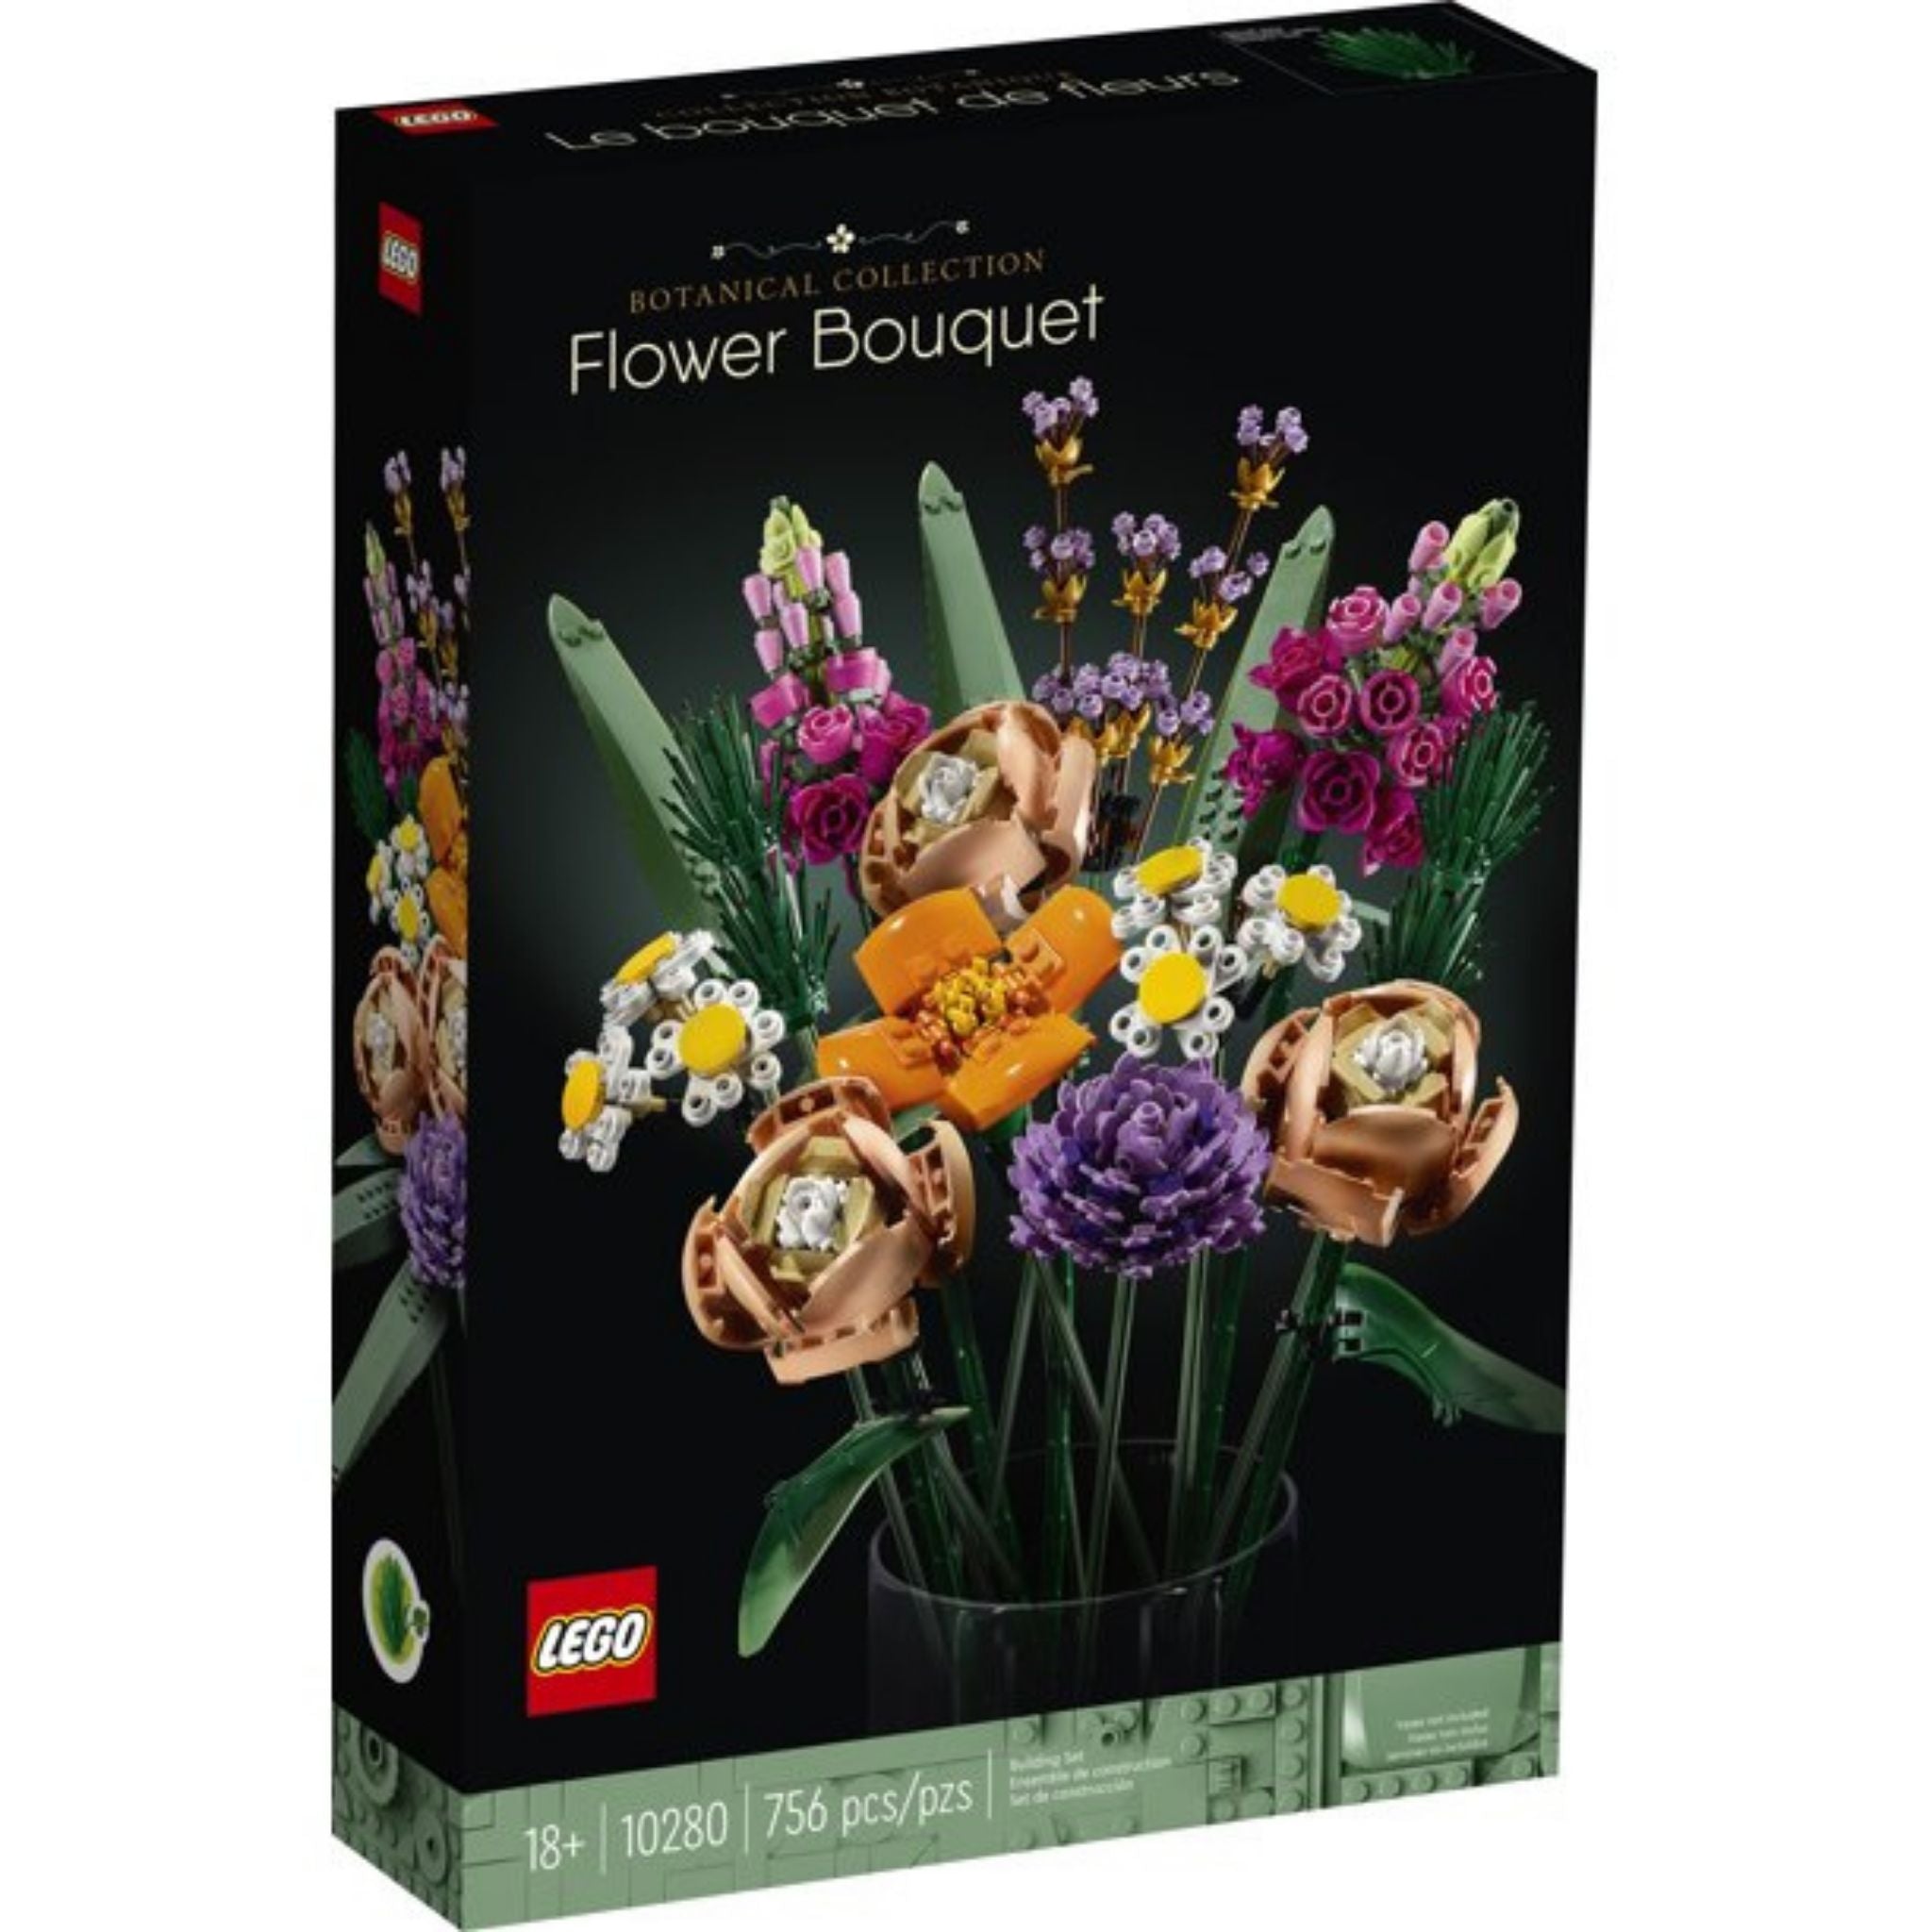 LEGO Flower Bouquet and Bonsai Tree Botanical Collection Full Review! 